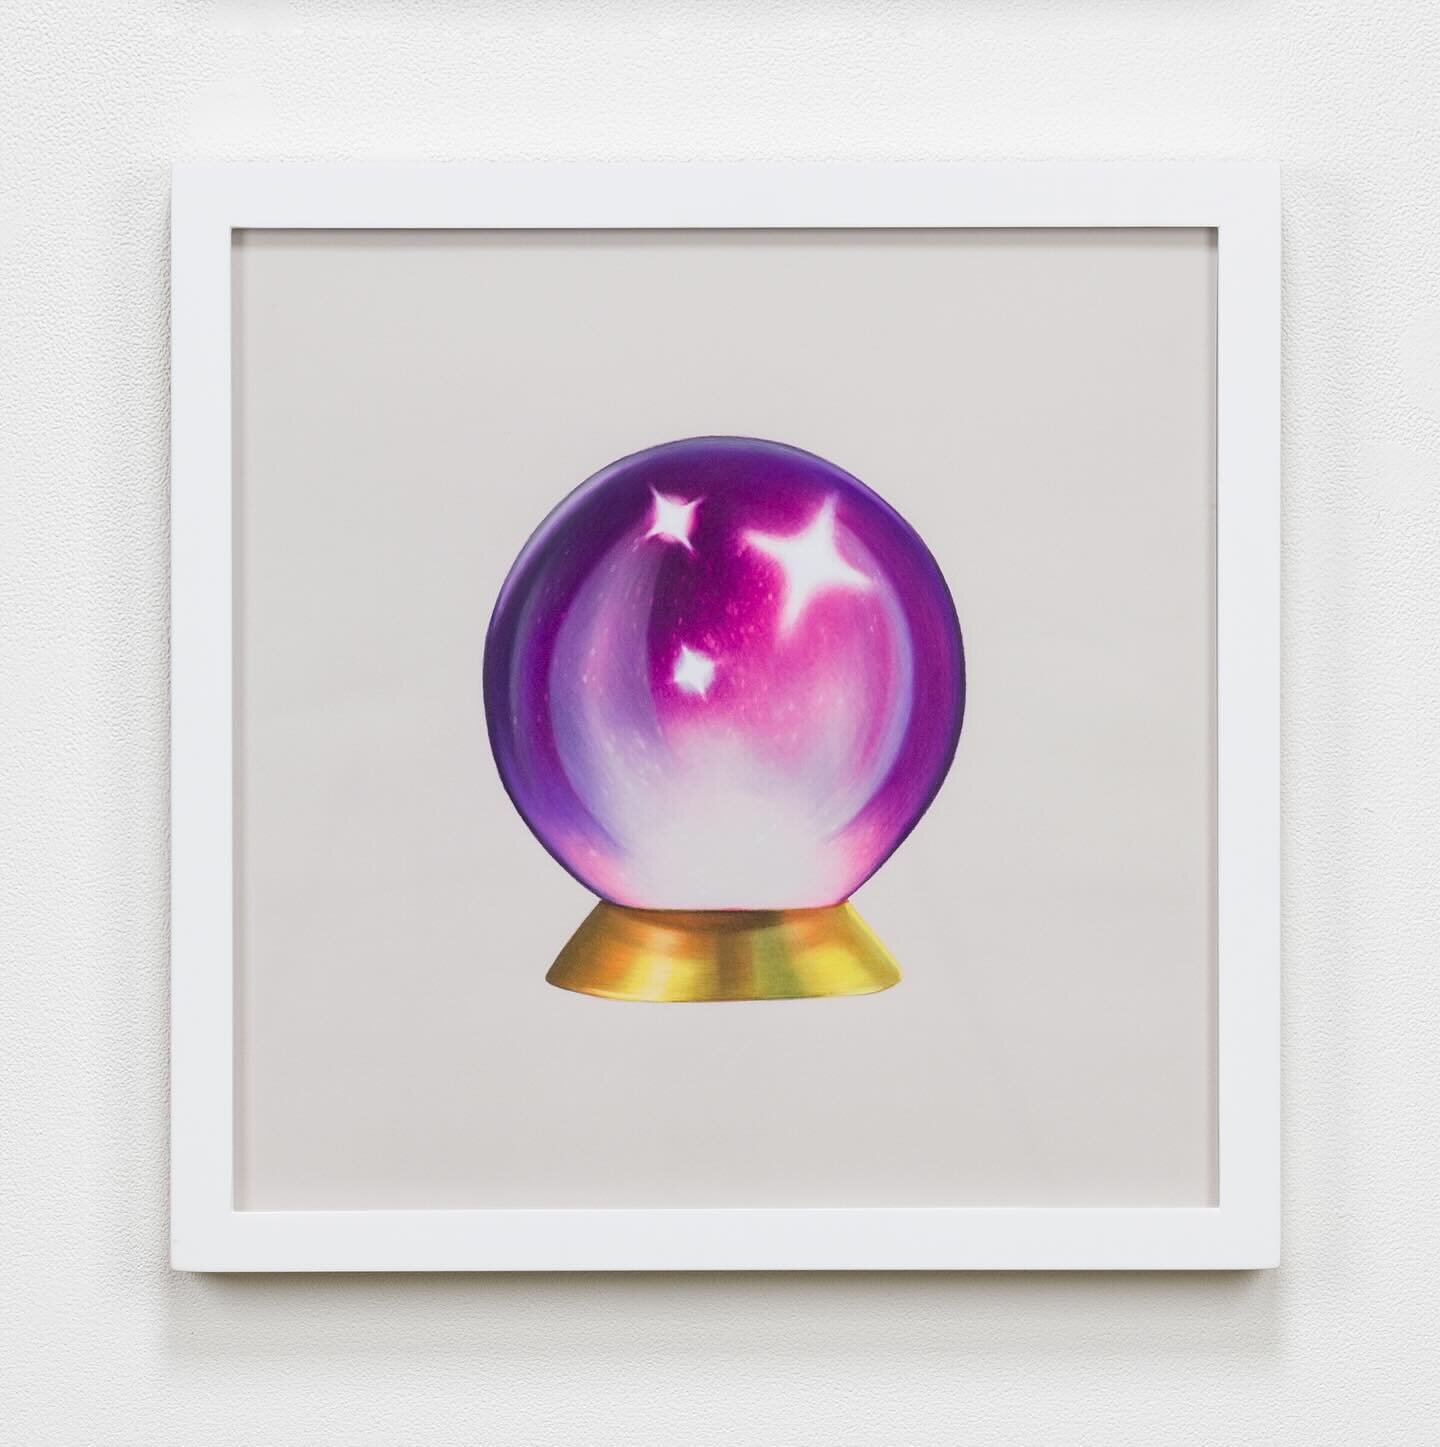 #FROMTHERACKS //

In honor of the new year, here is a meticulously detailed color pencil drawing by Anna Von Mertens entitled Crystal Ball, September 20, 2017. Taken from Von Mertens&rsquo; series of &ldquo;emoji drawings,&rdquo; we invite you to gaz